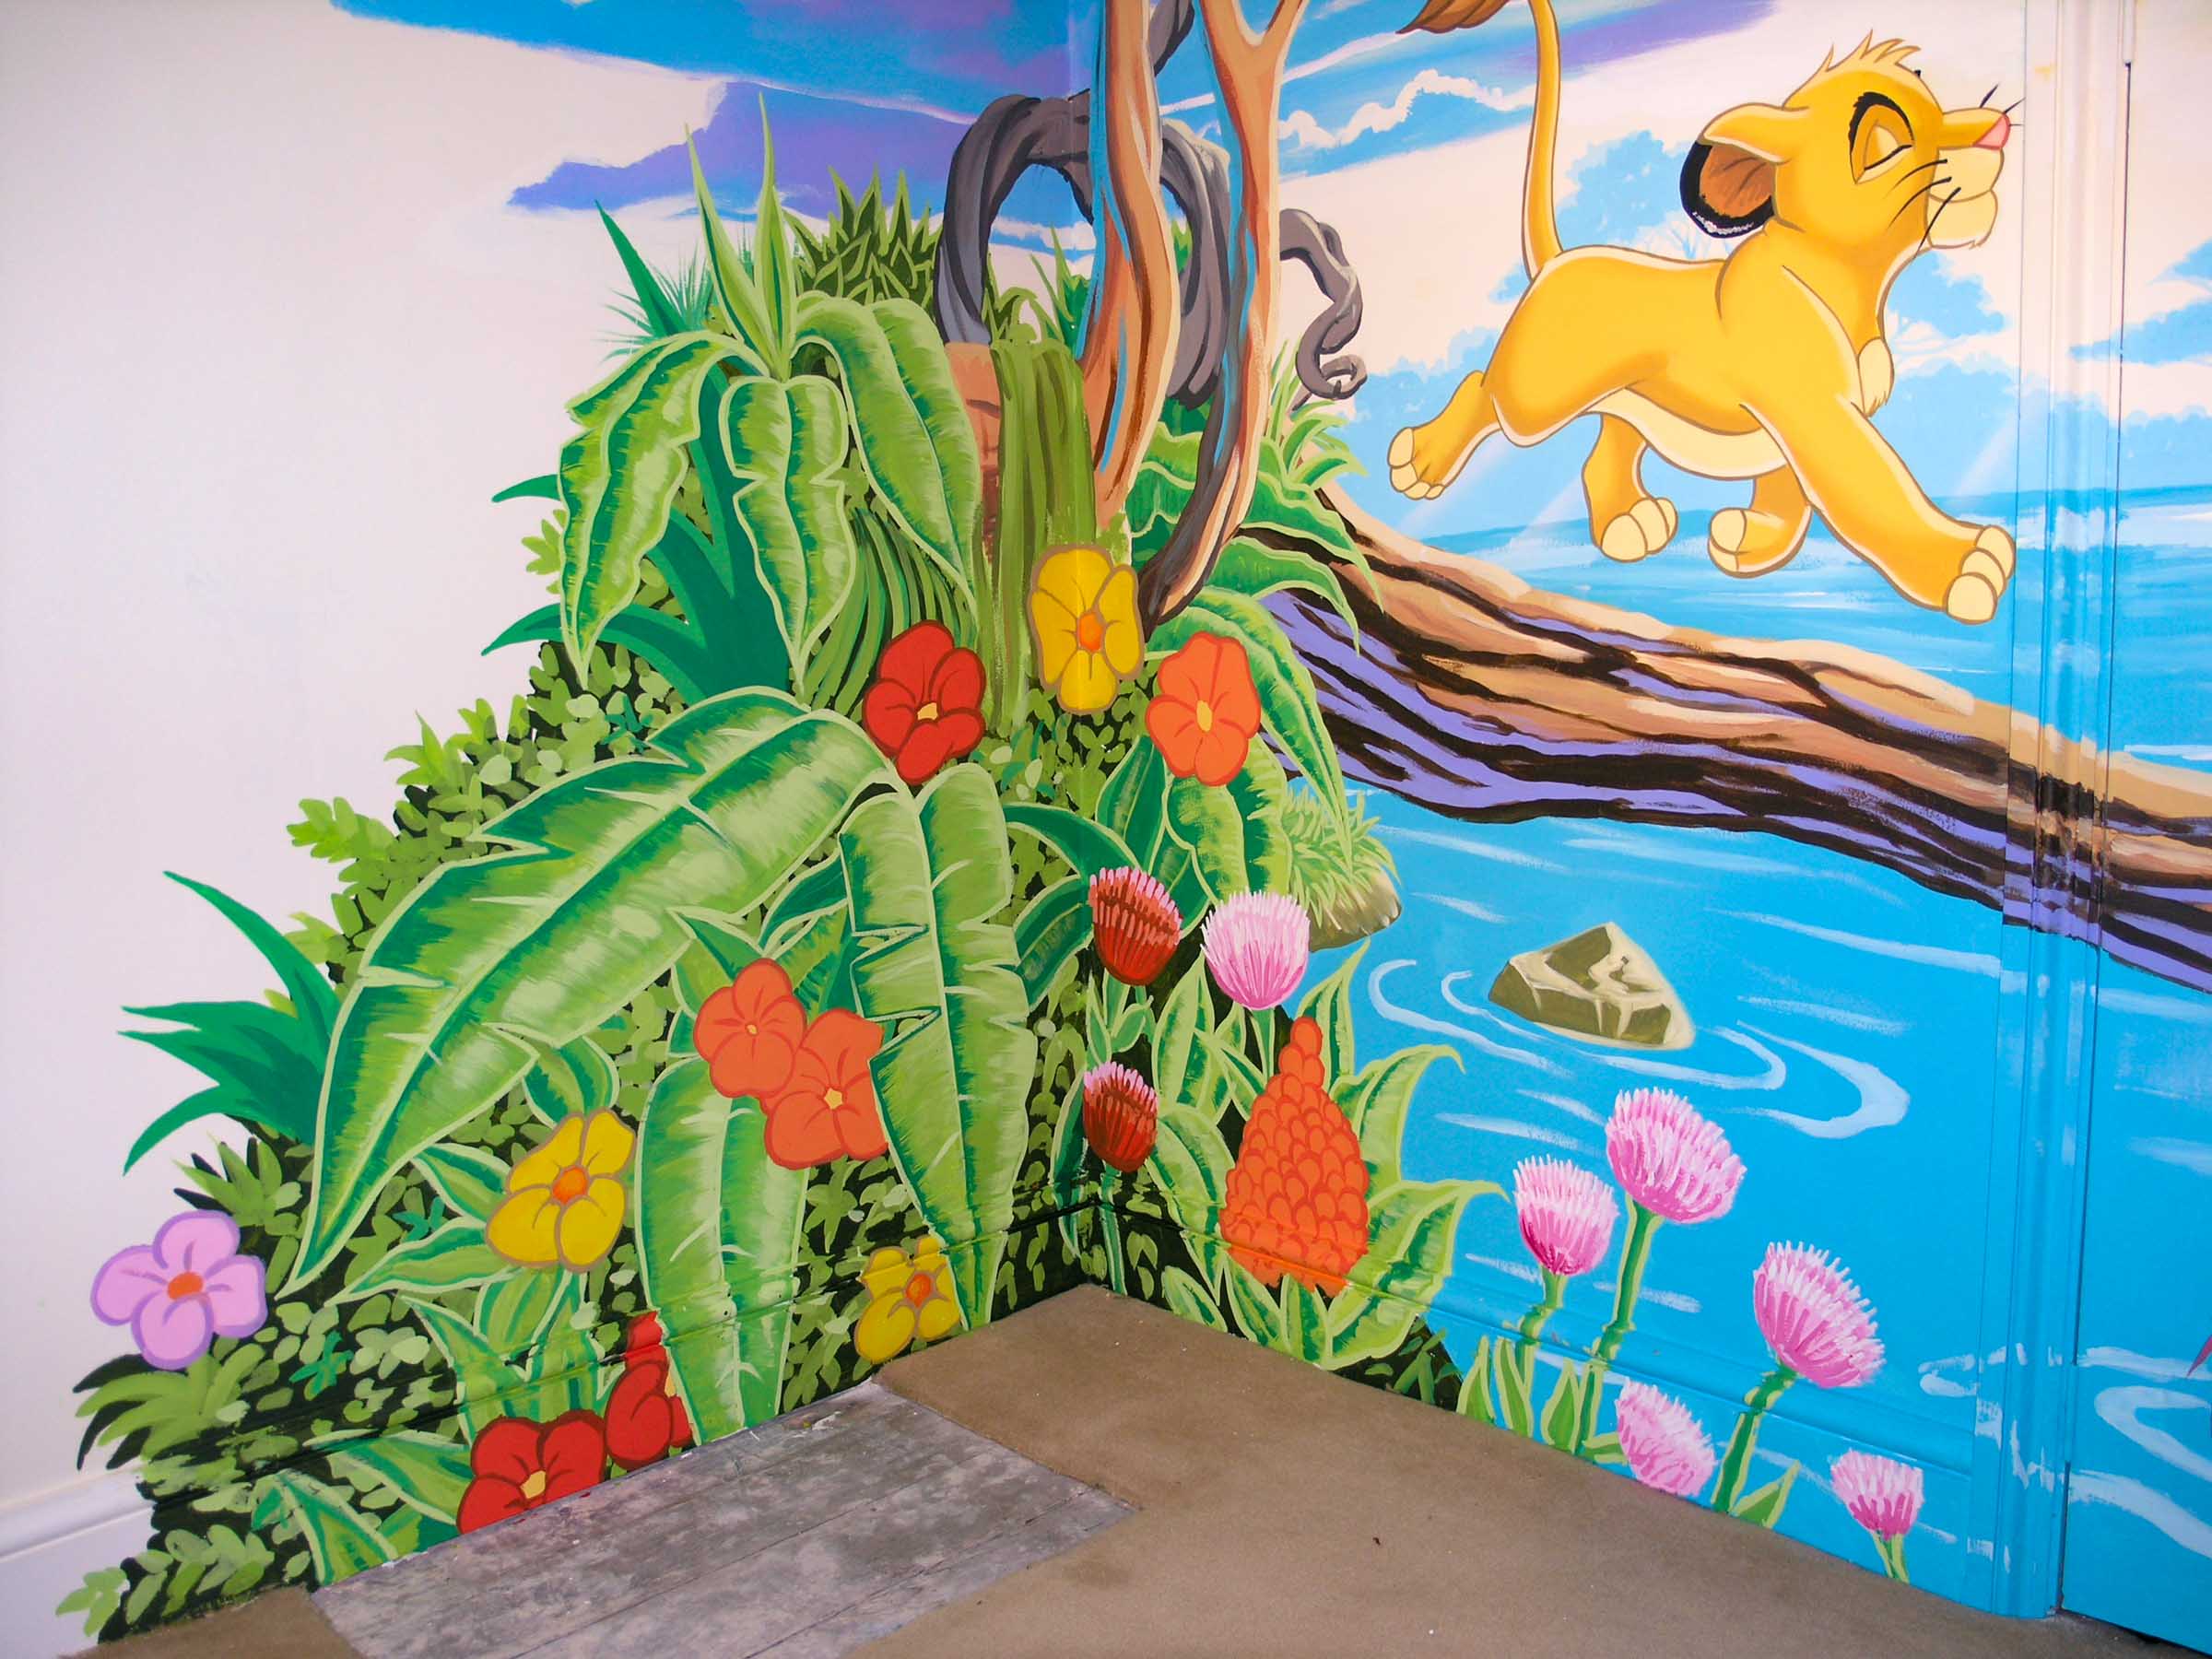 Corner foliage of the Lion King Mural